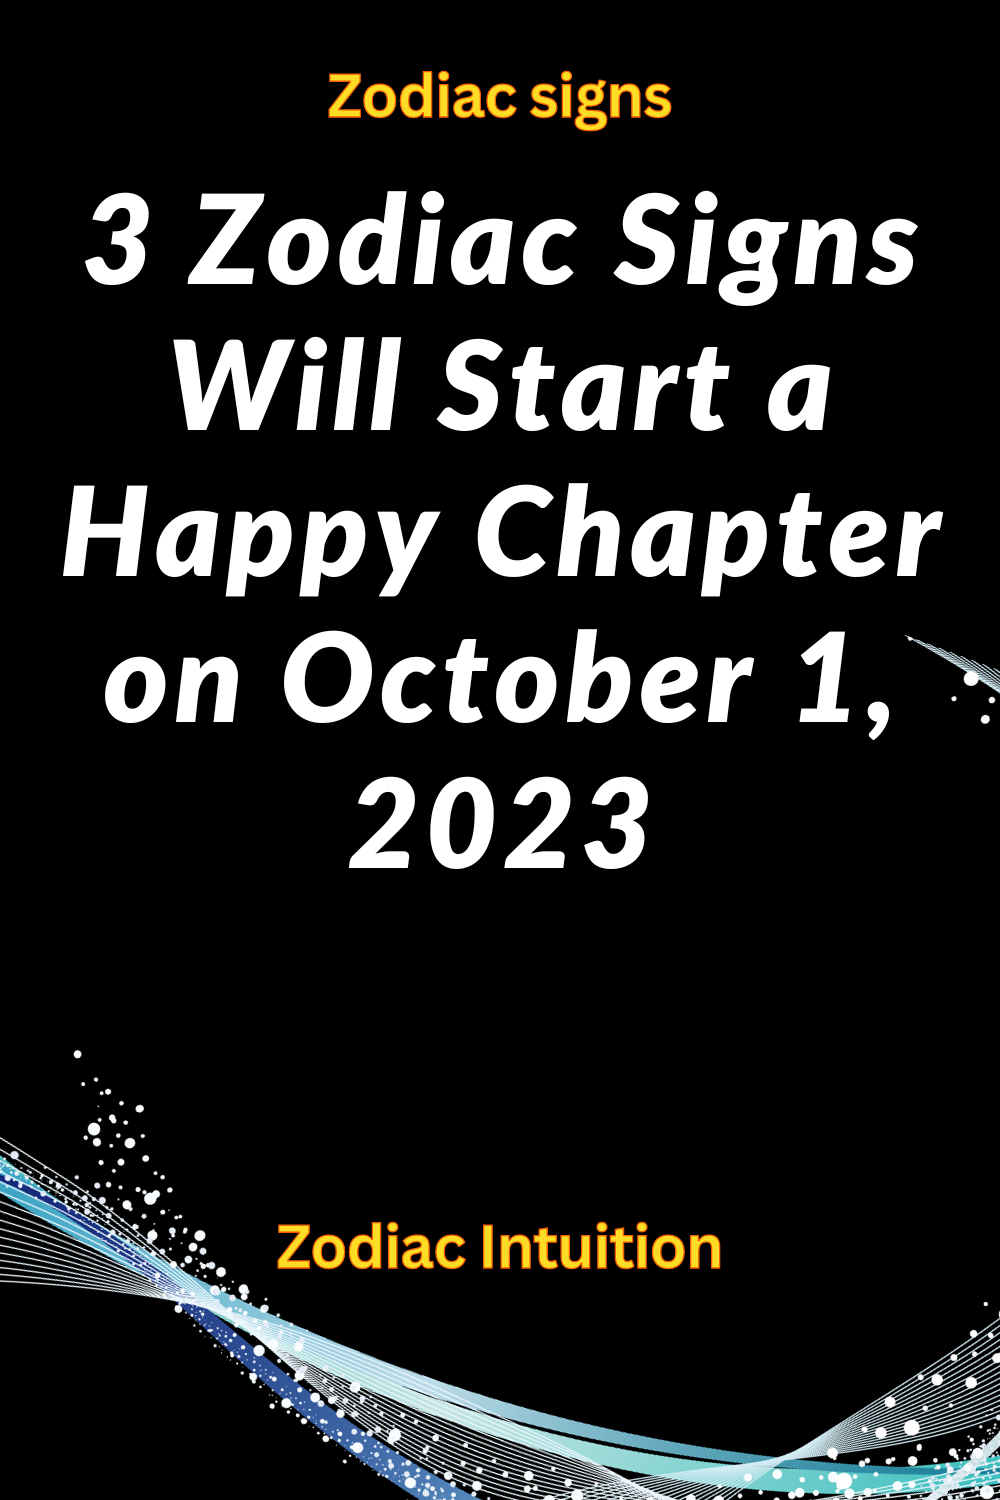 3 Zodiac Signs Will Start a Happy Chapter on October 1, 2023